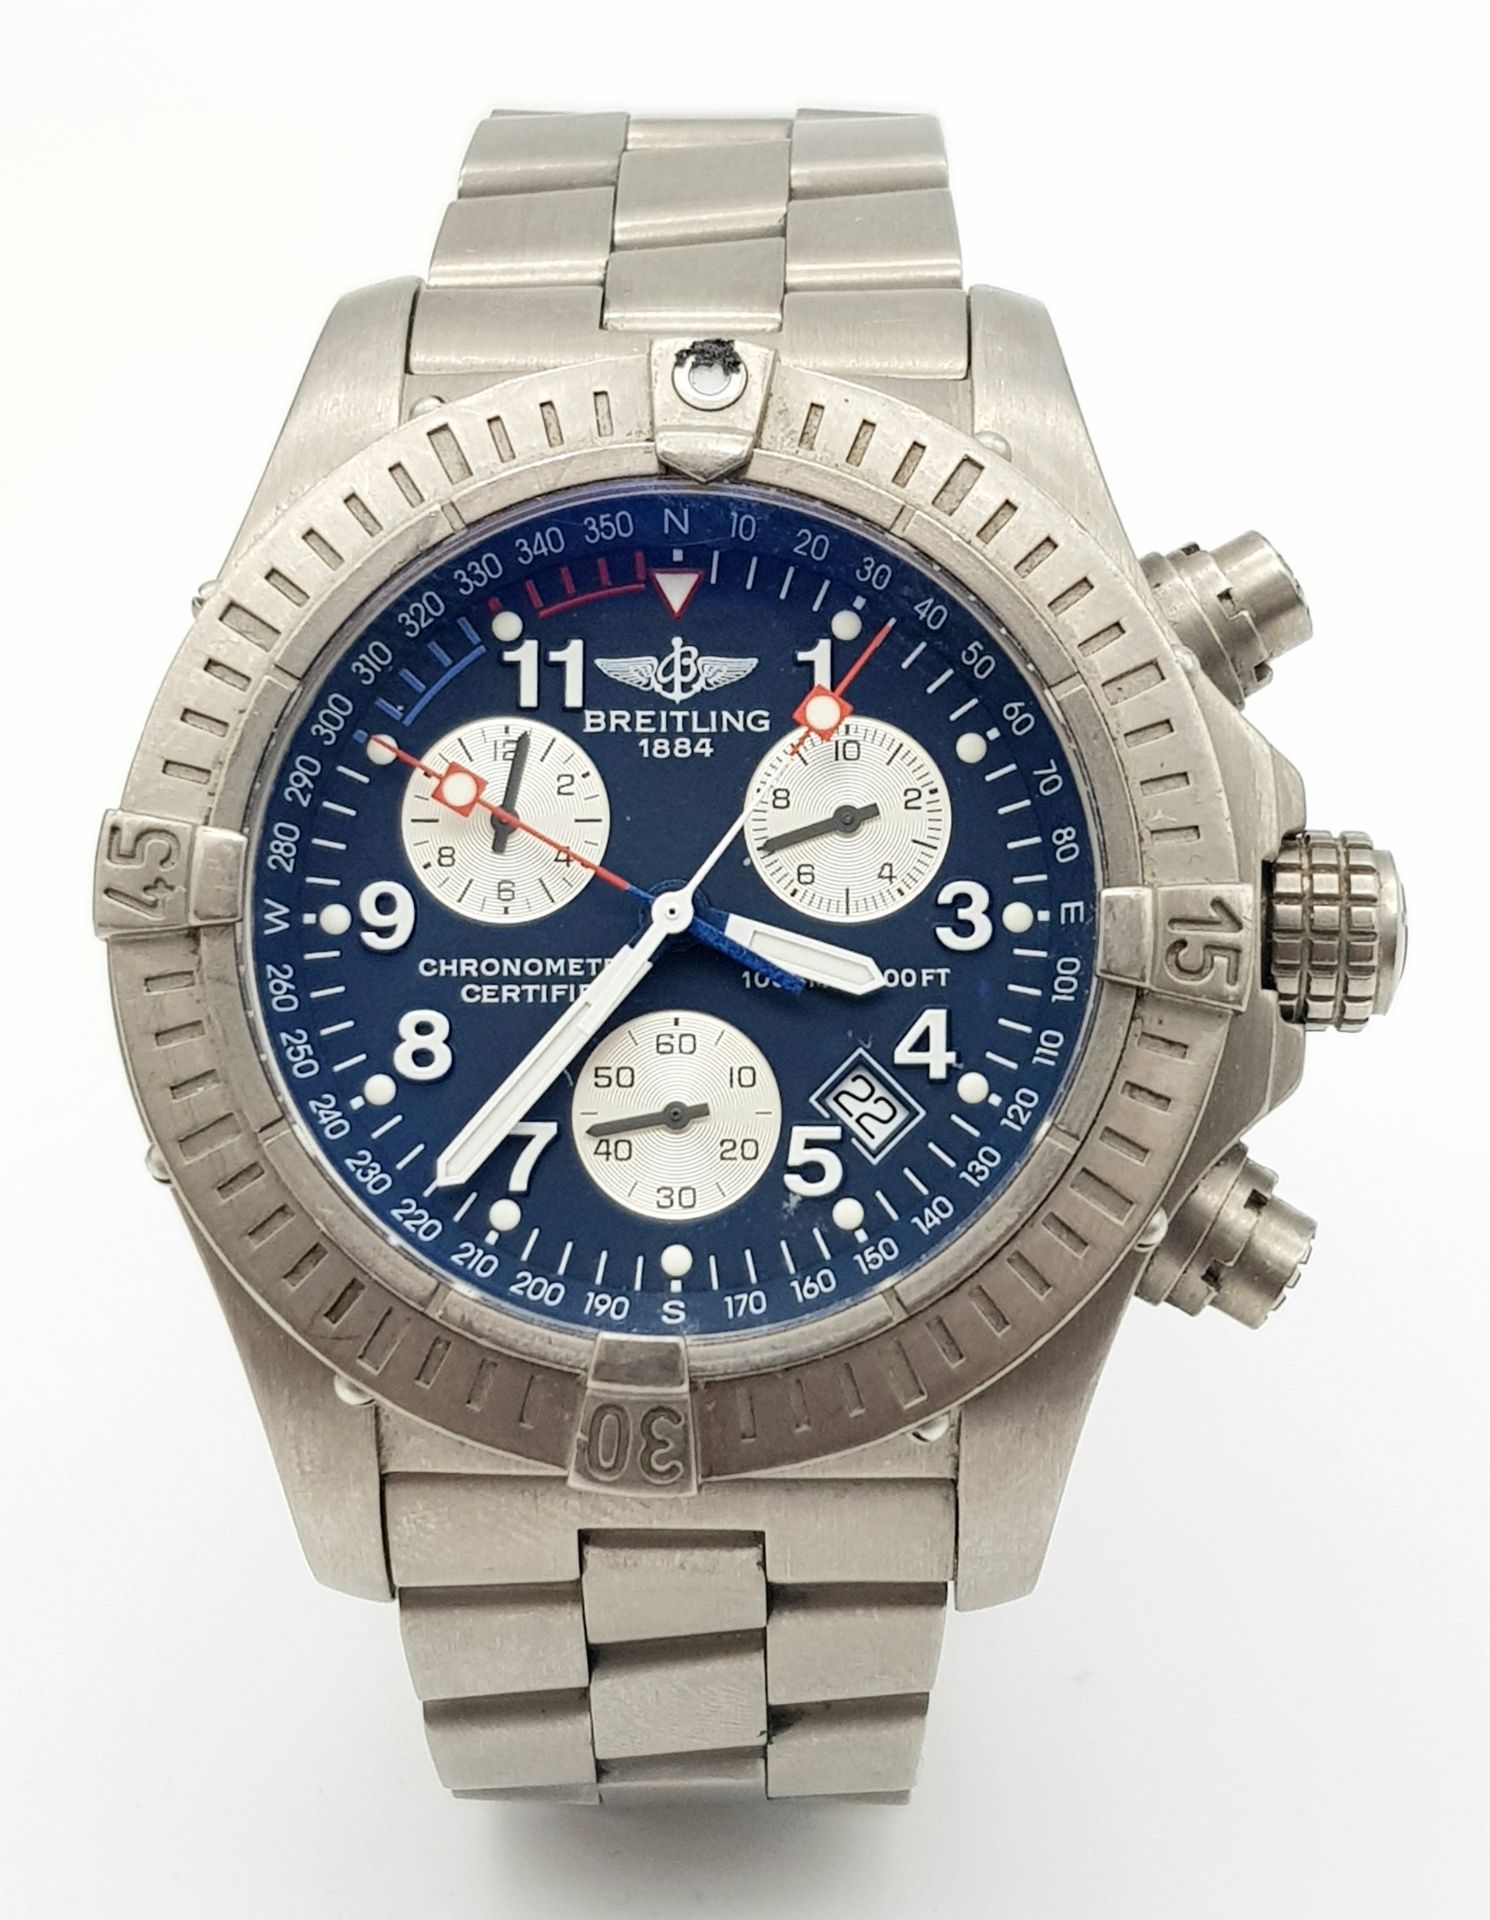 A BREITLING GTS CHRONOMETRE IN STAINLESS STEEL WITH BLUE FACE AND 3 SUBDIALS , AUTOMATIC - Image 2 of 10